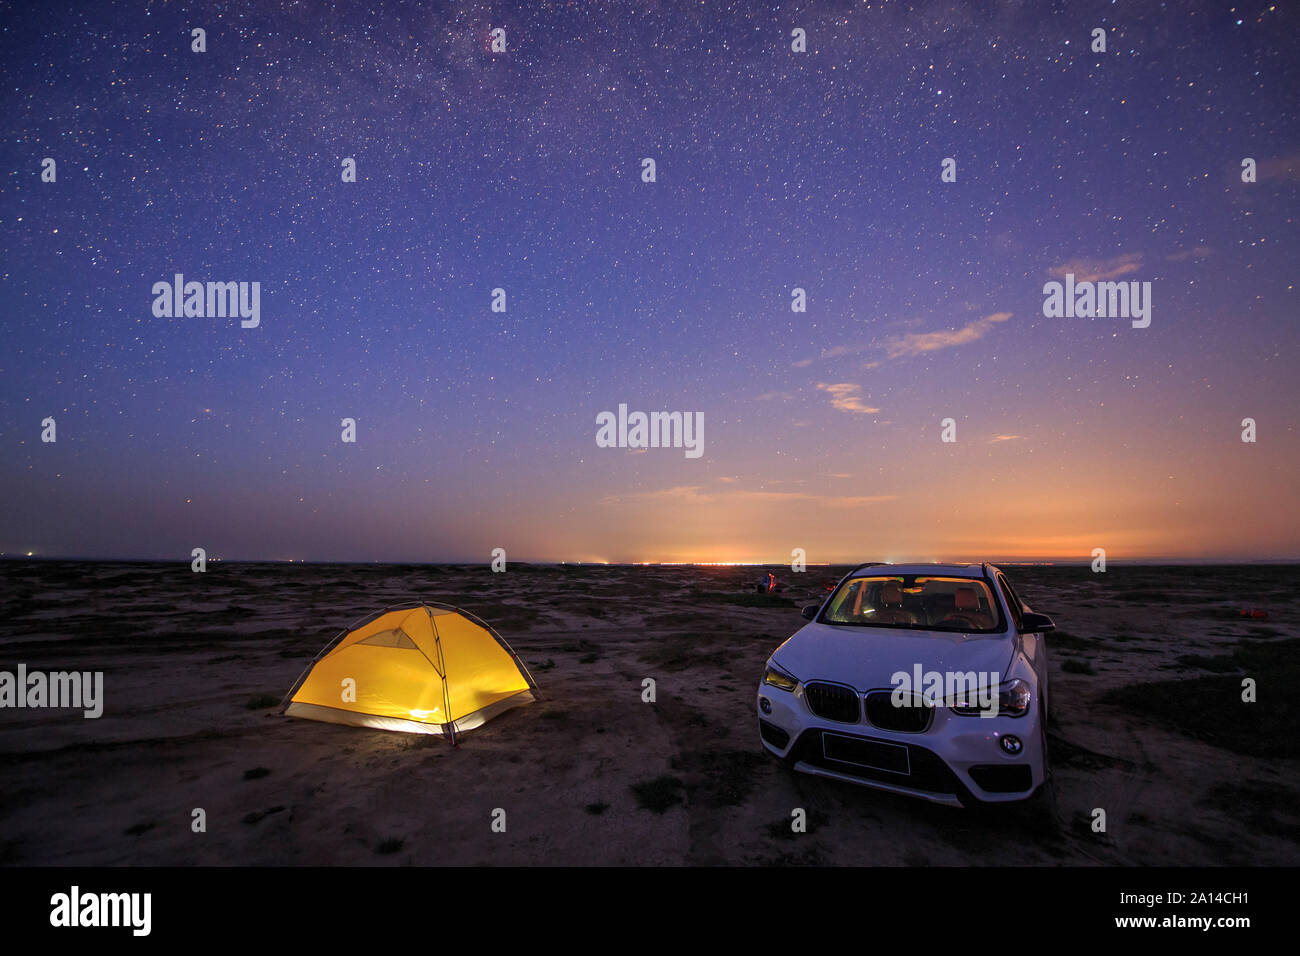 Stars and light pollution from a camping site in Hebei, China. Stock Photo